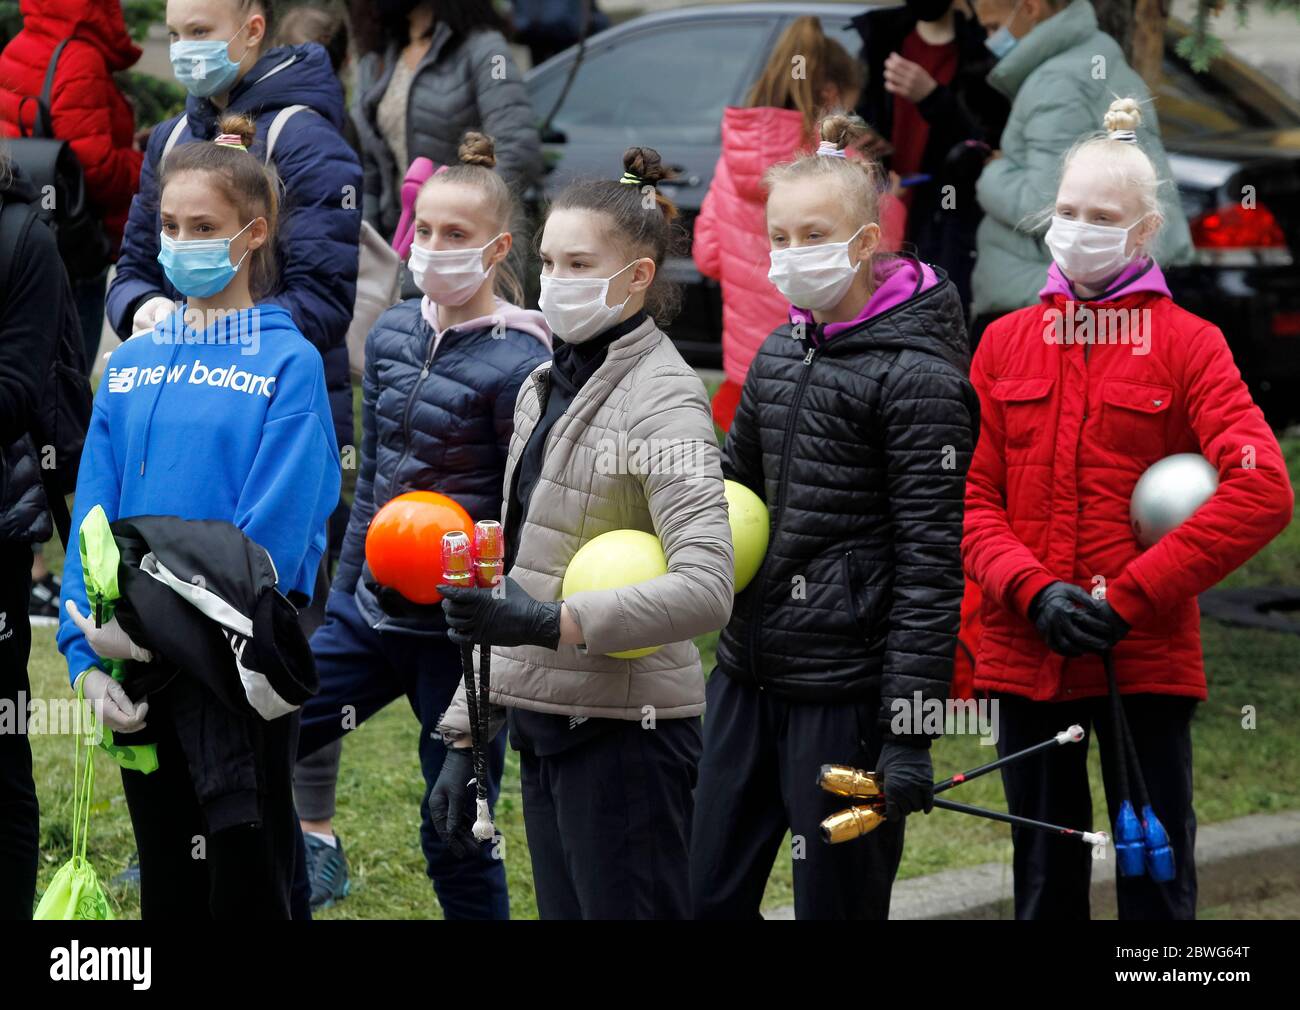 Gymnasts wearing face masks as a preventive measure against the spread of COVID-19 coronavirus attend an open-air training session.Young gymnasts of Ukrainian Deriugina School staged an open-air training session to raise awareness on the situation of the Deriugina School with no building for training, because the rental agreement for the club's training facility expired. The Deriugina School is known rhythmic gymnastics club by the former world champion Irina Deriugina, her coach and mom Albina Deriugina. Irina Deriugina is a former Soviet individual rhythmic gymnast from Ukraine and Ukrainian Stock Photo